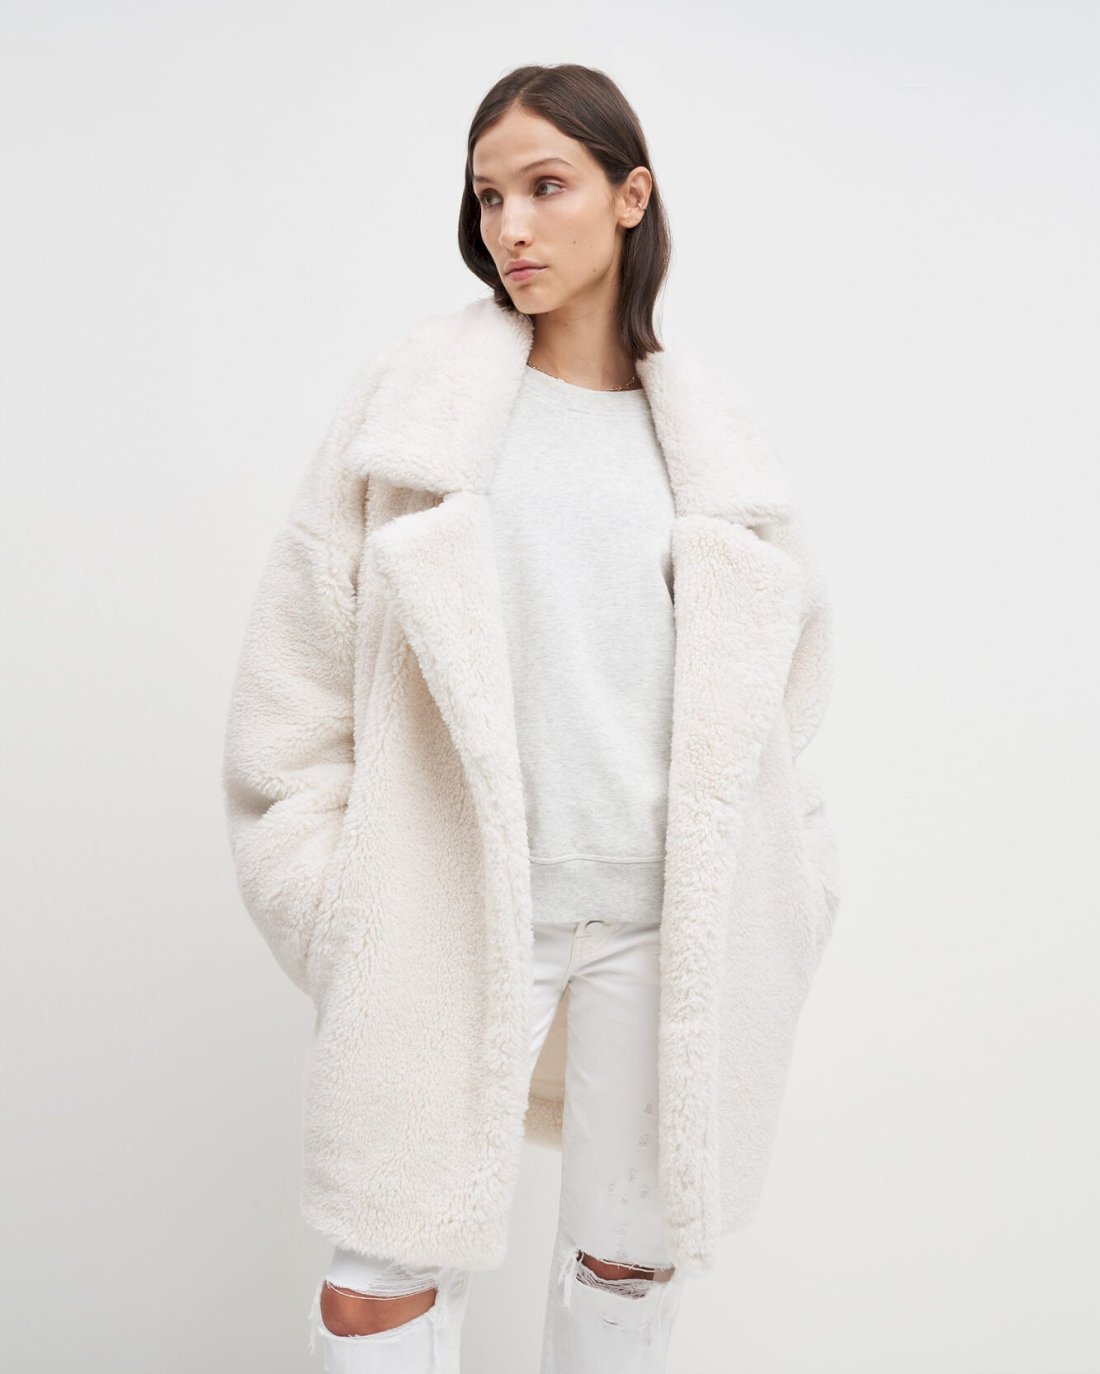 Shearling Cozy Coat In Ivory | 7 For All Mankind